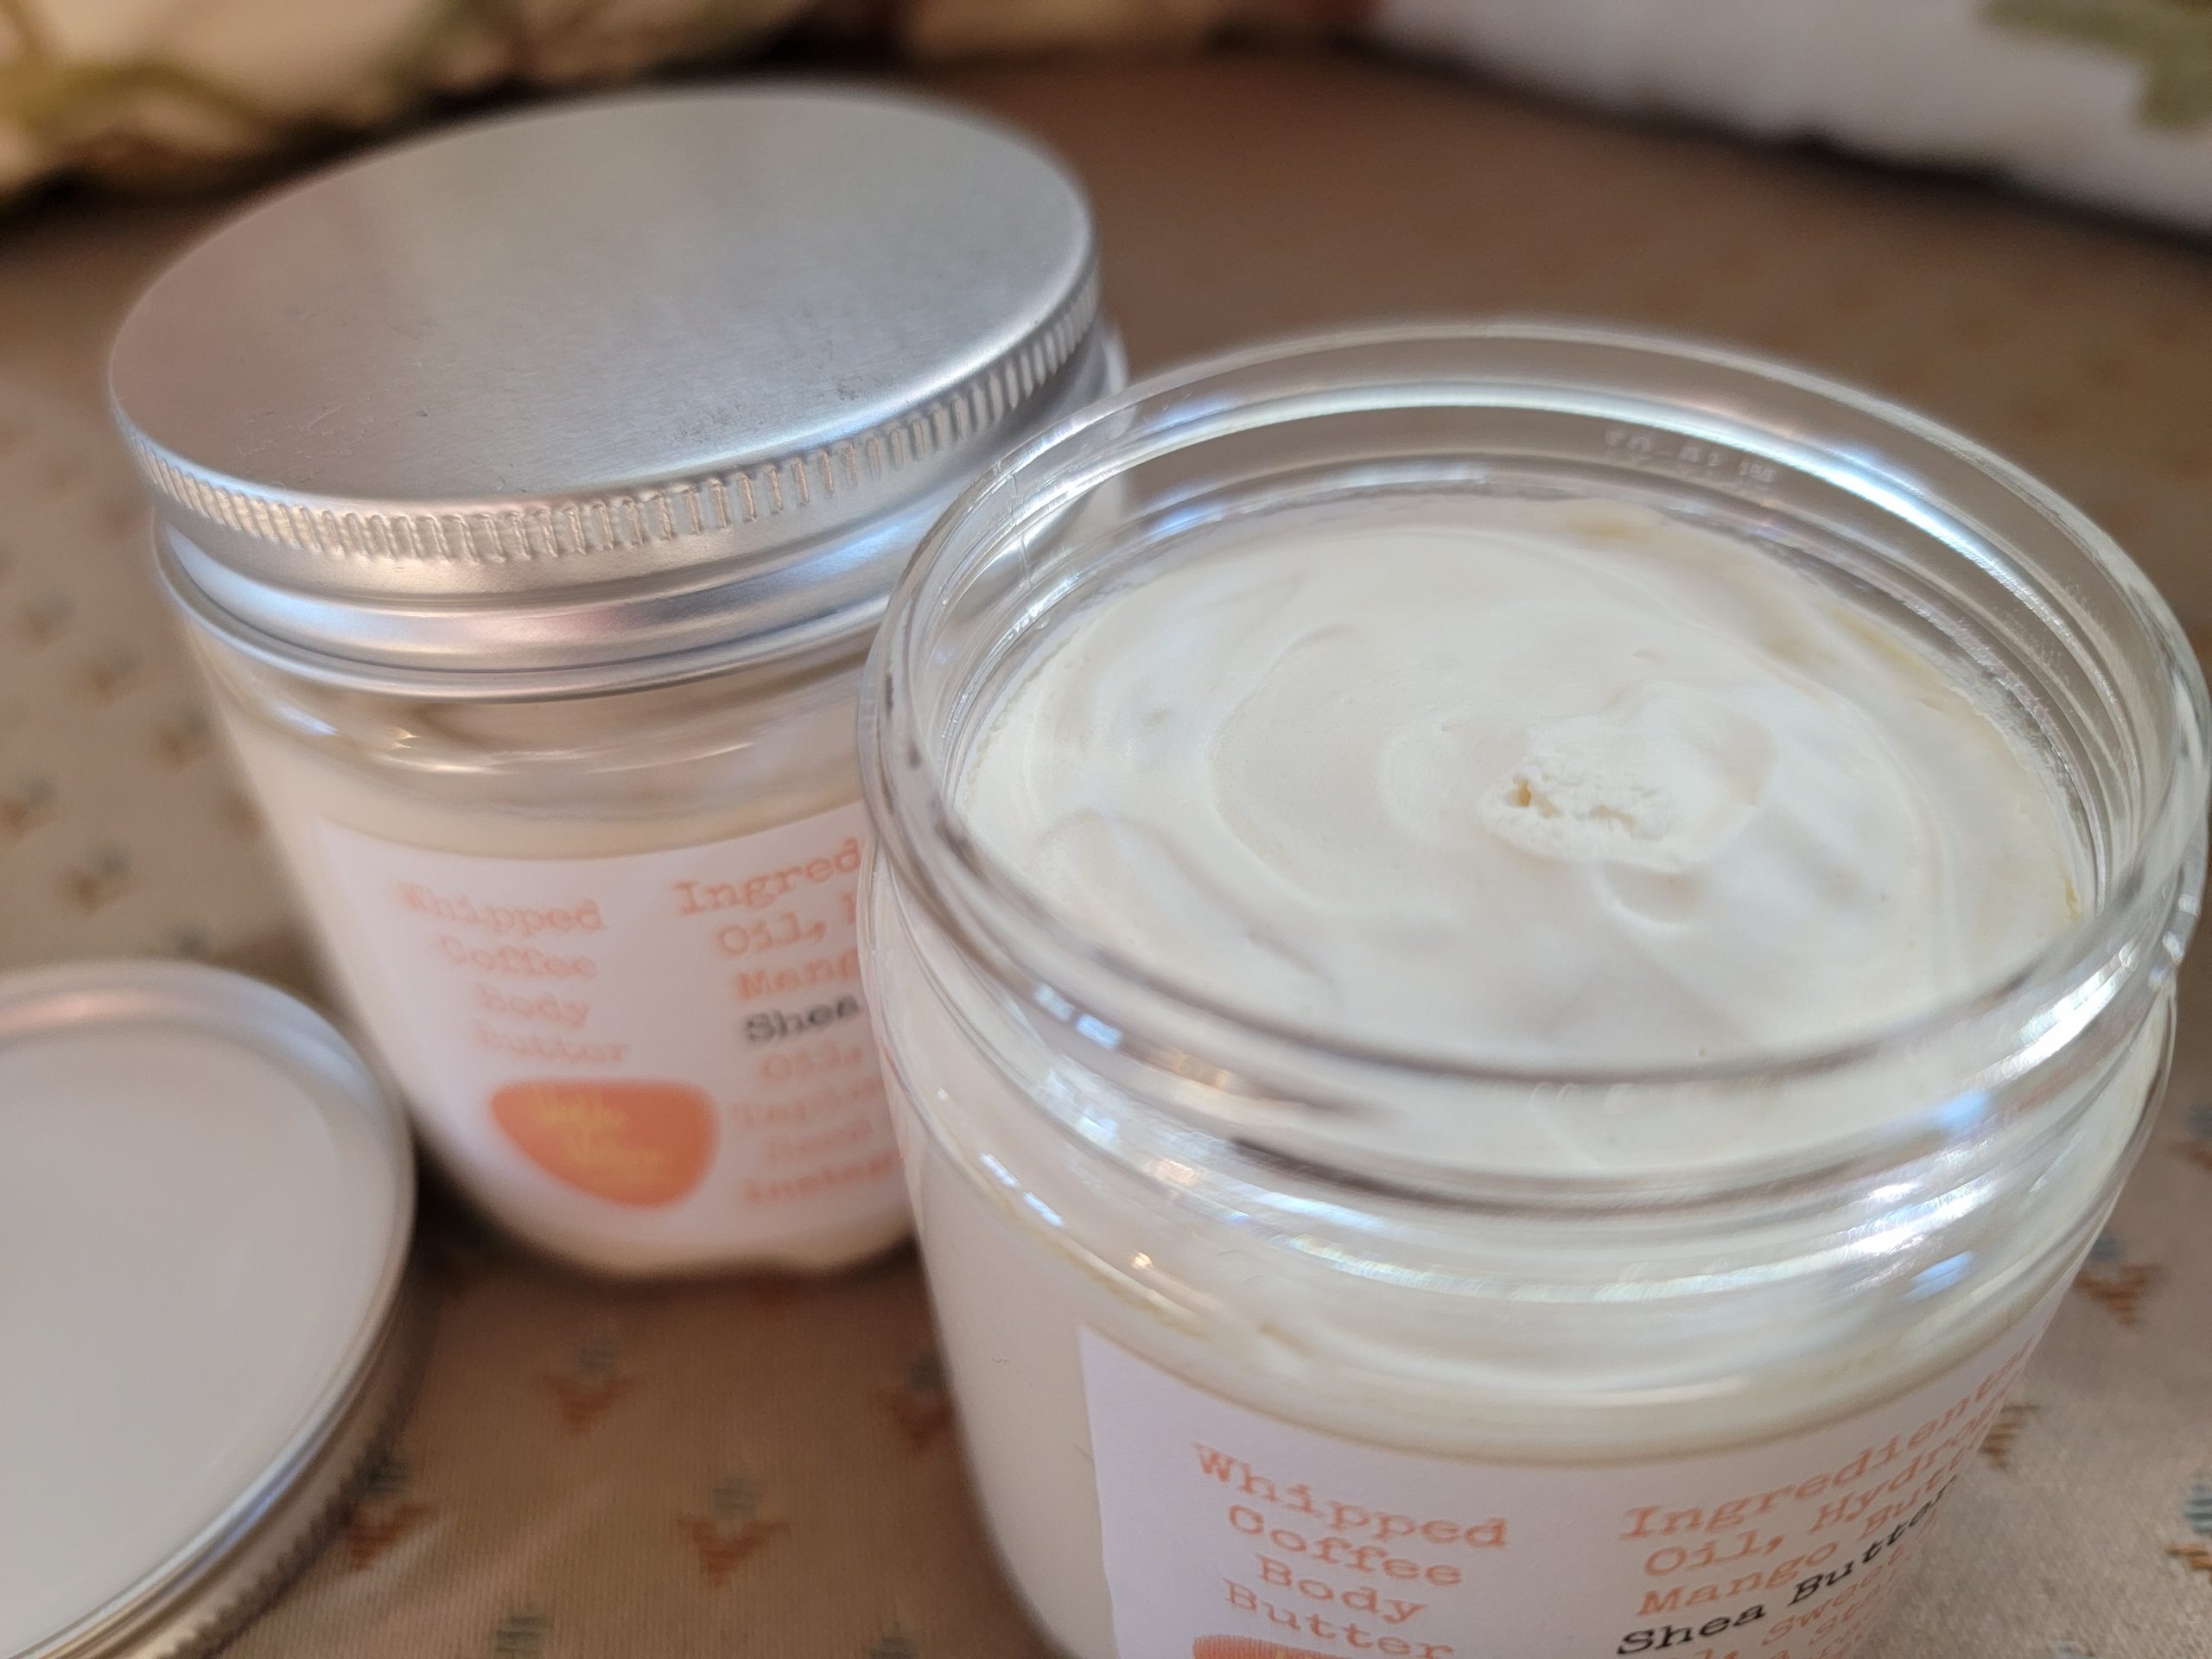 Whipped Coffee Body Butter by VeeVee Victoria